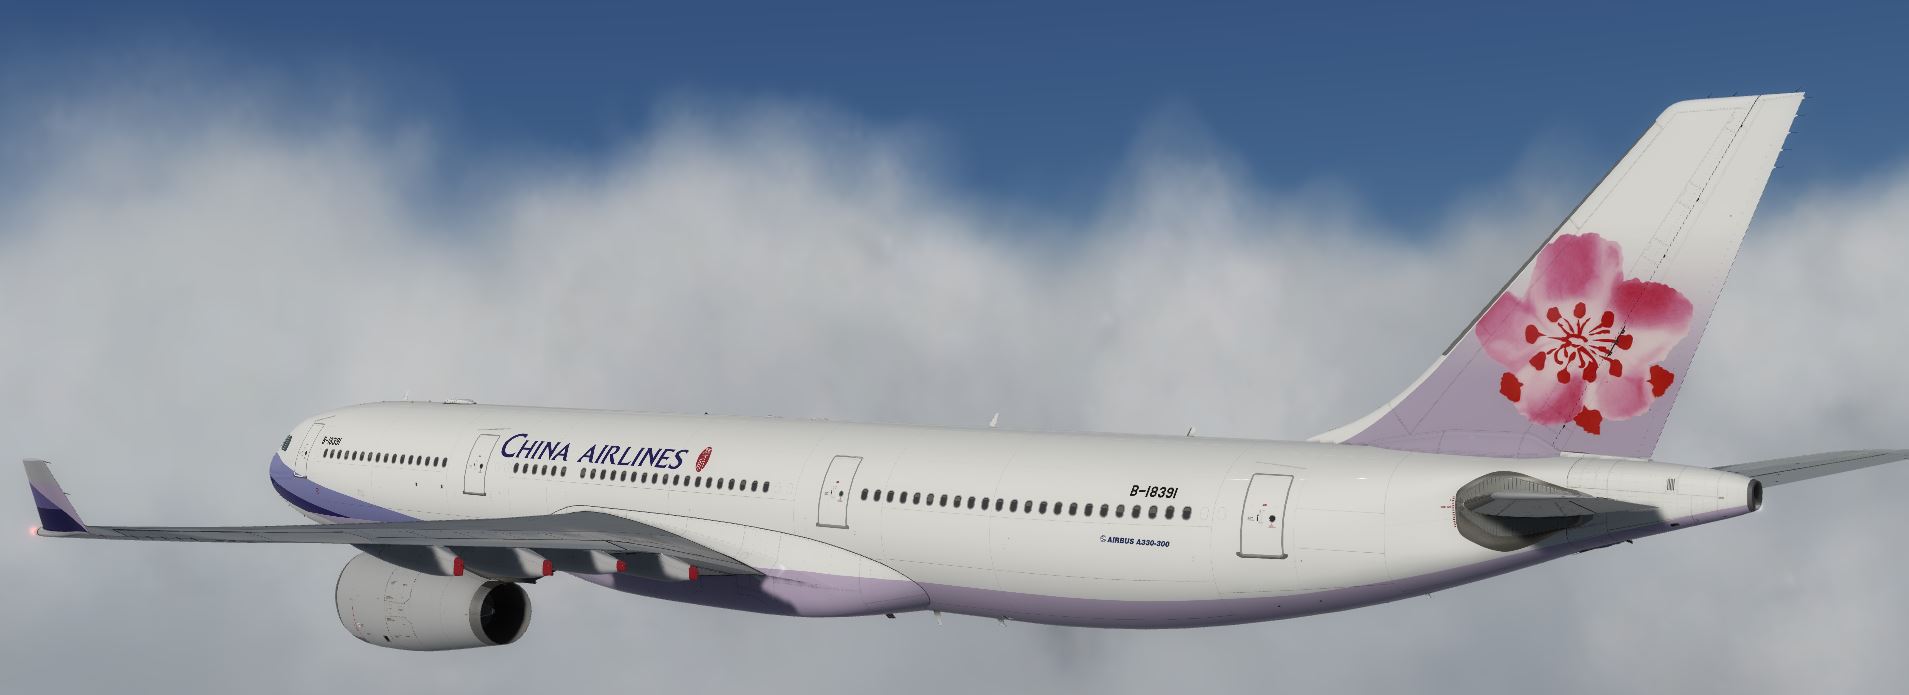 AS A330 ChinaAirline-7044 